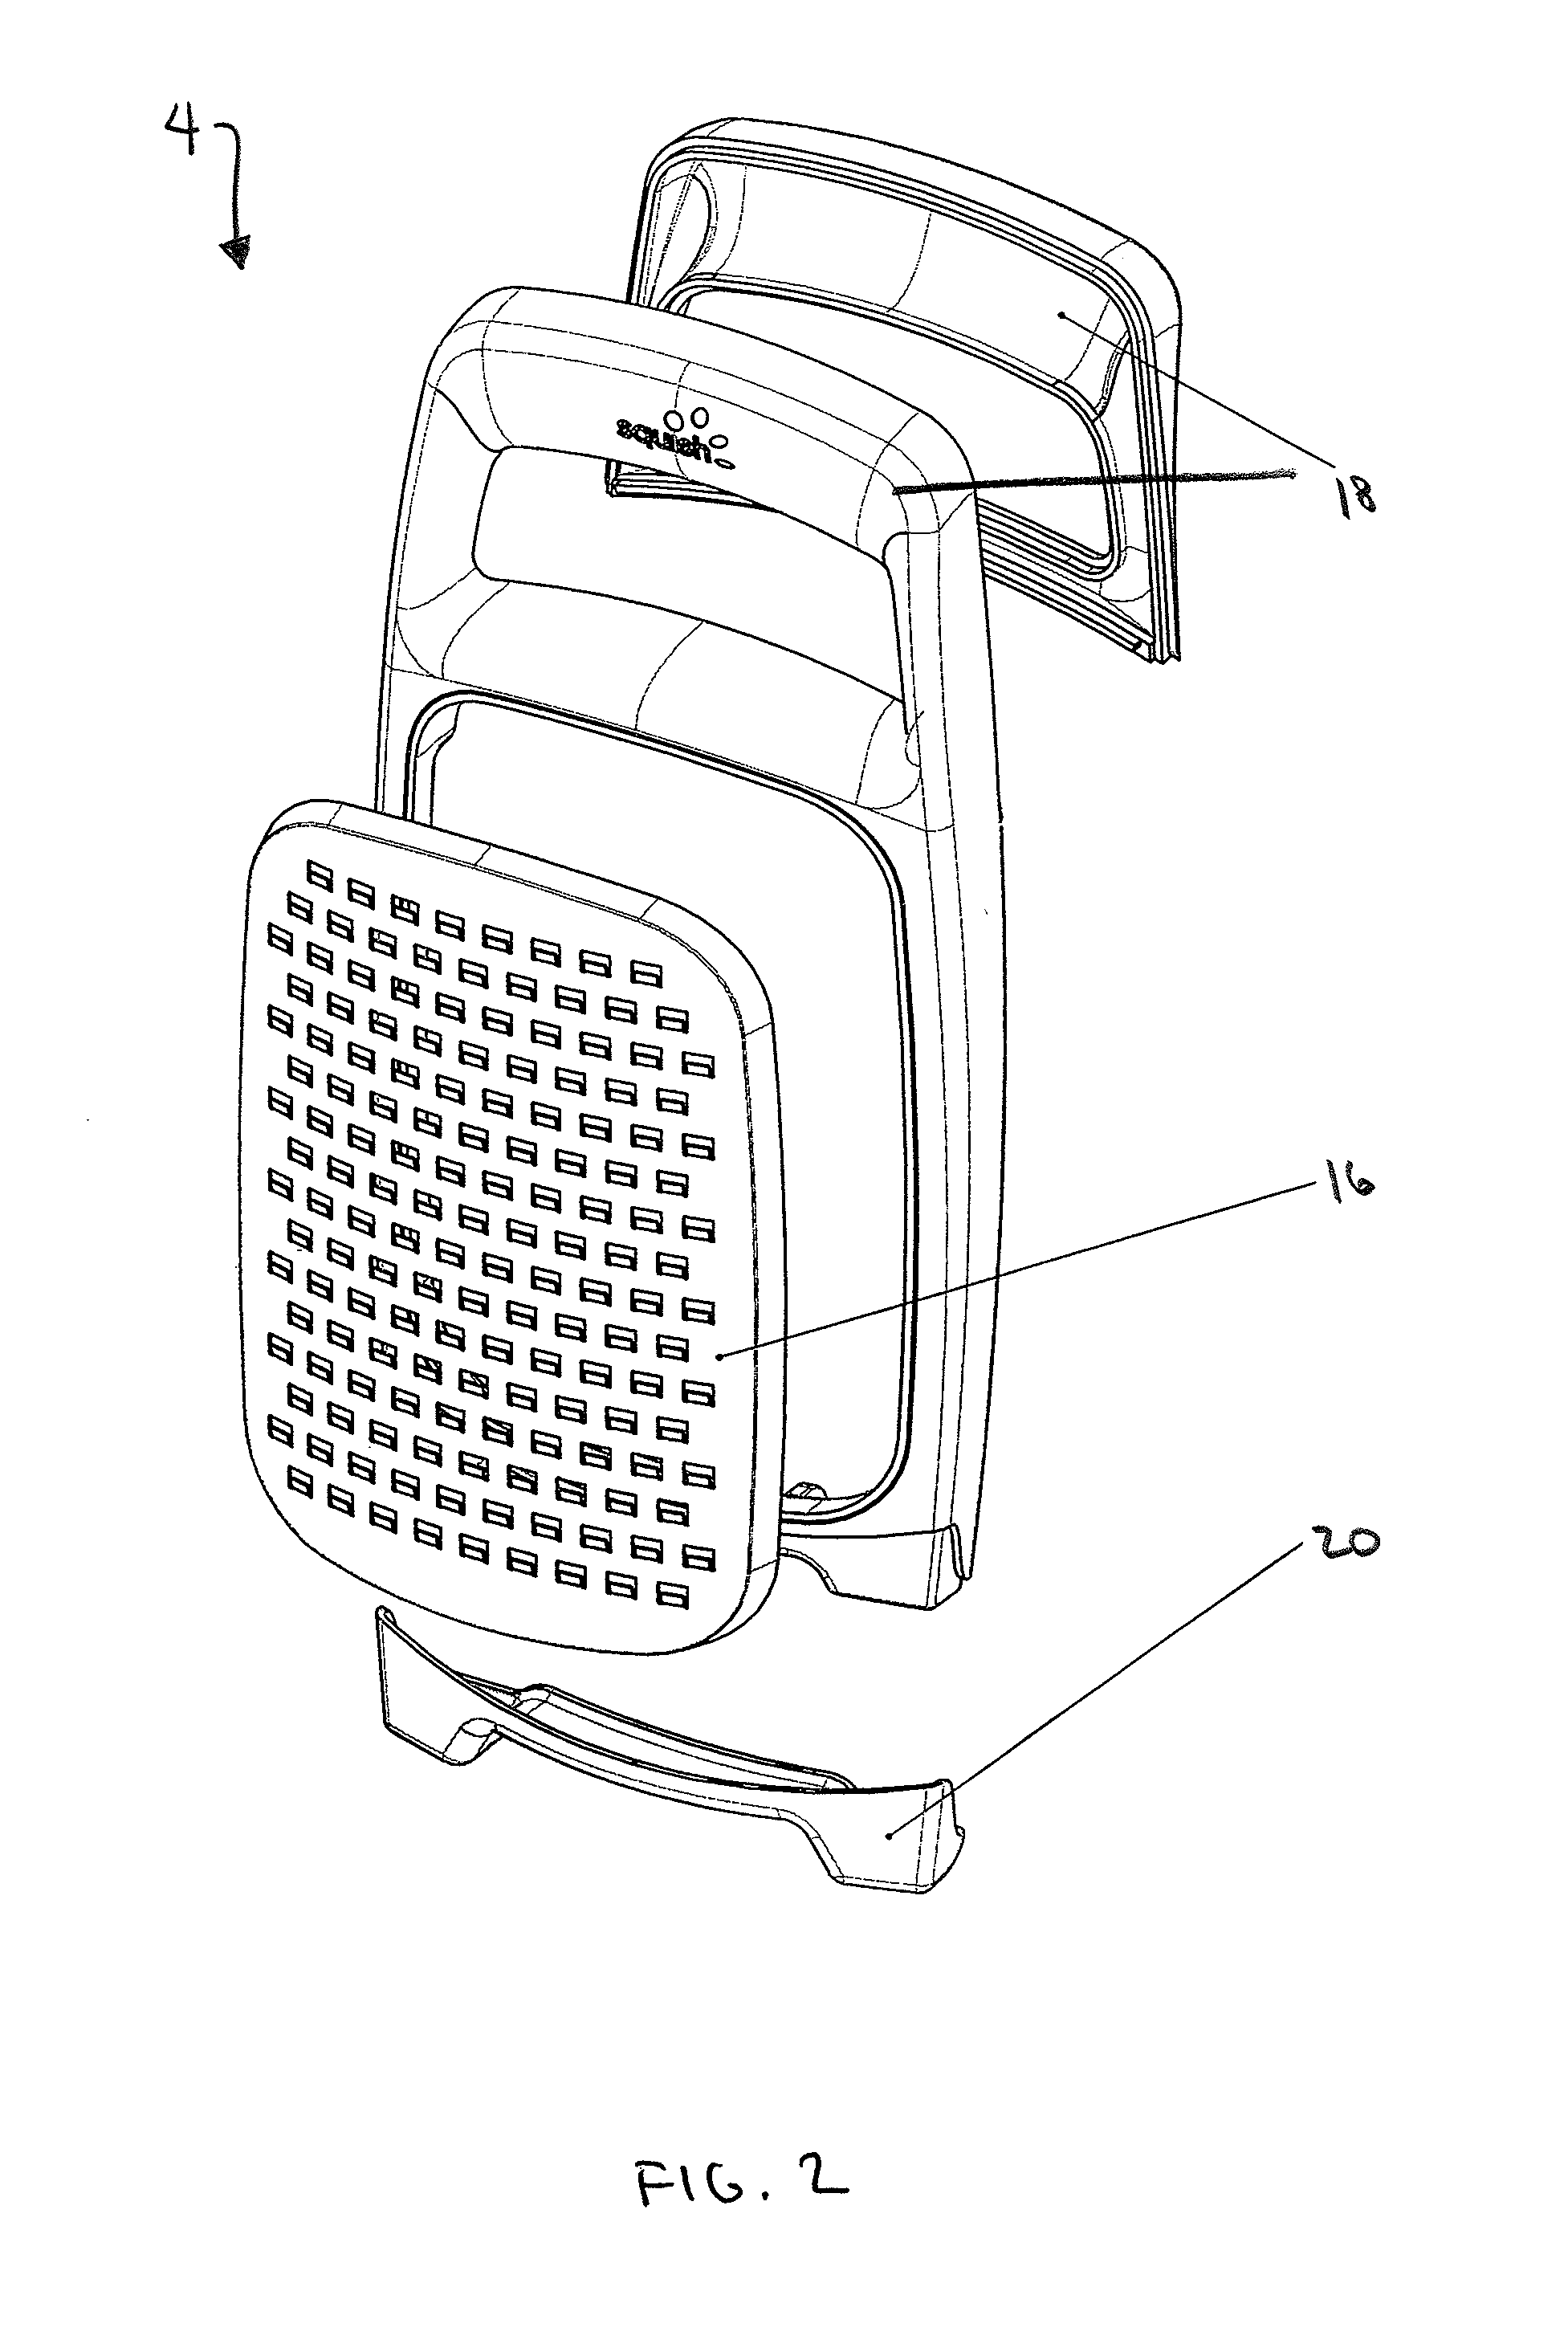 Handheld grater with catch bin